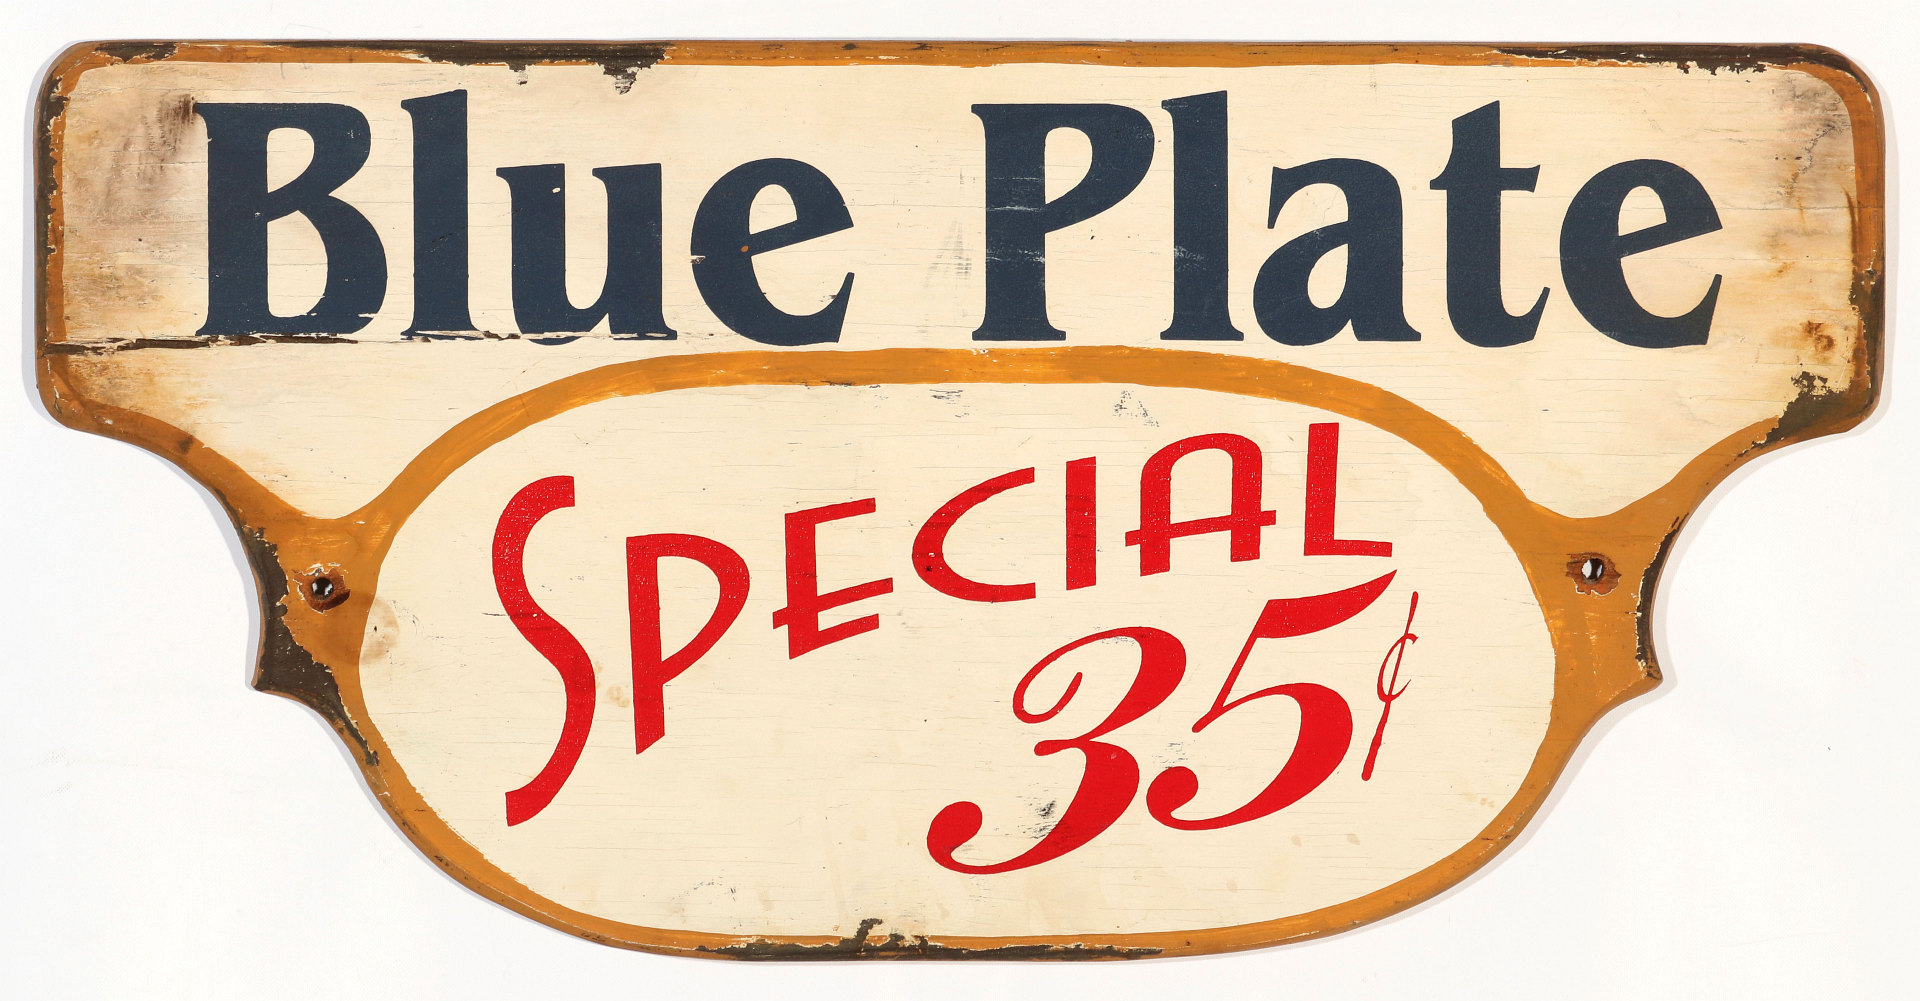 PAINTED WOOD SIGN - BLUE PLATE SPECIAL 35 CENTS